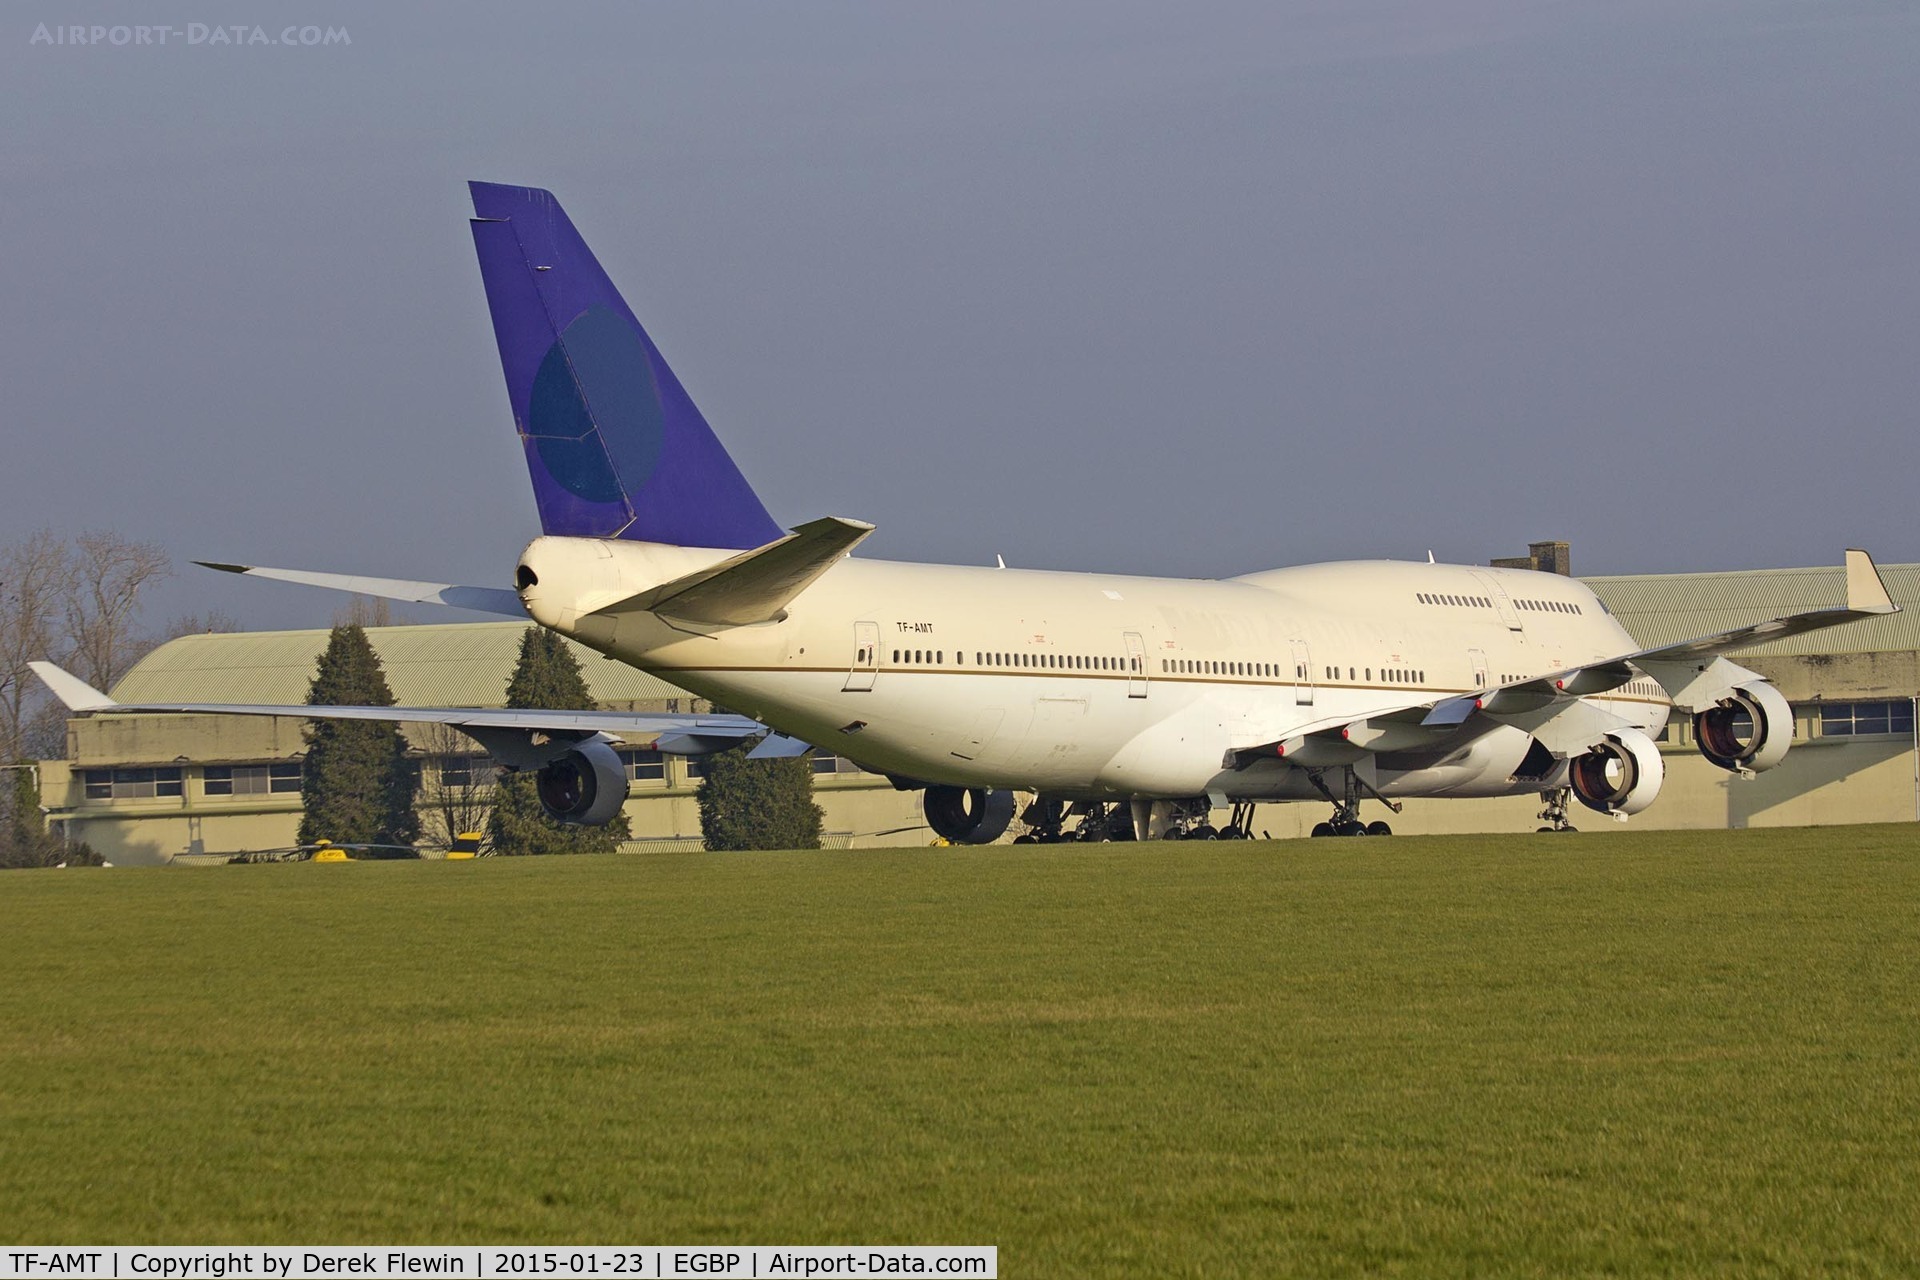 TF-AMT, 1991 Boeing 747-481 C/N 25135, 747-481, ex Saudi Arabian Airlines, previously JA8097, stored.